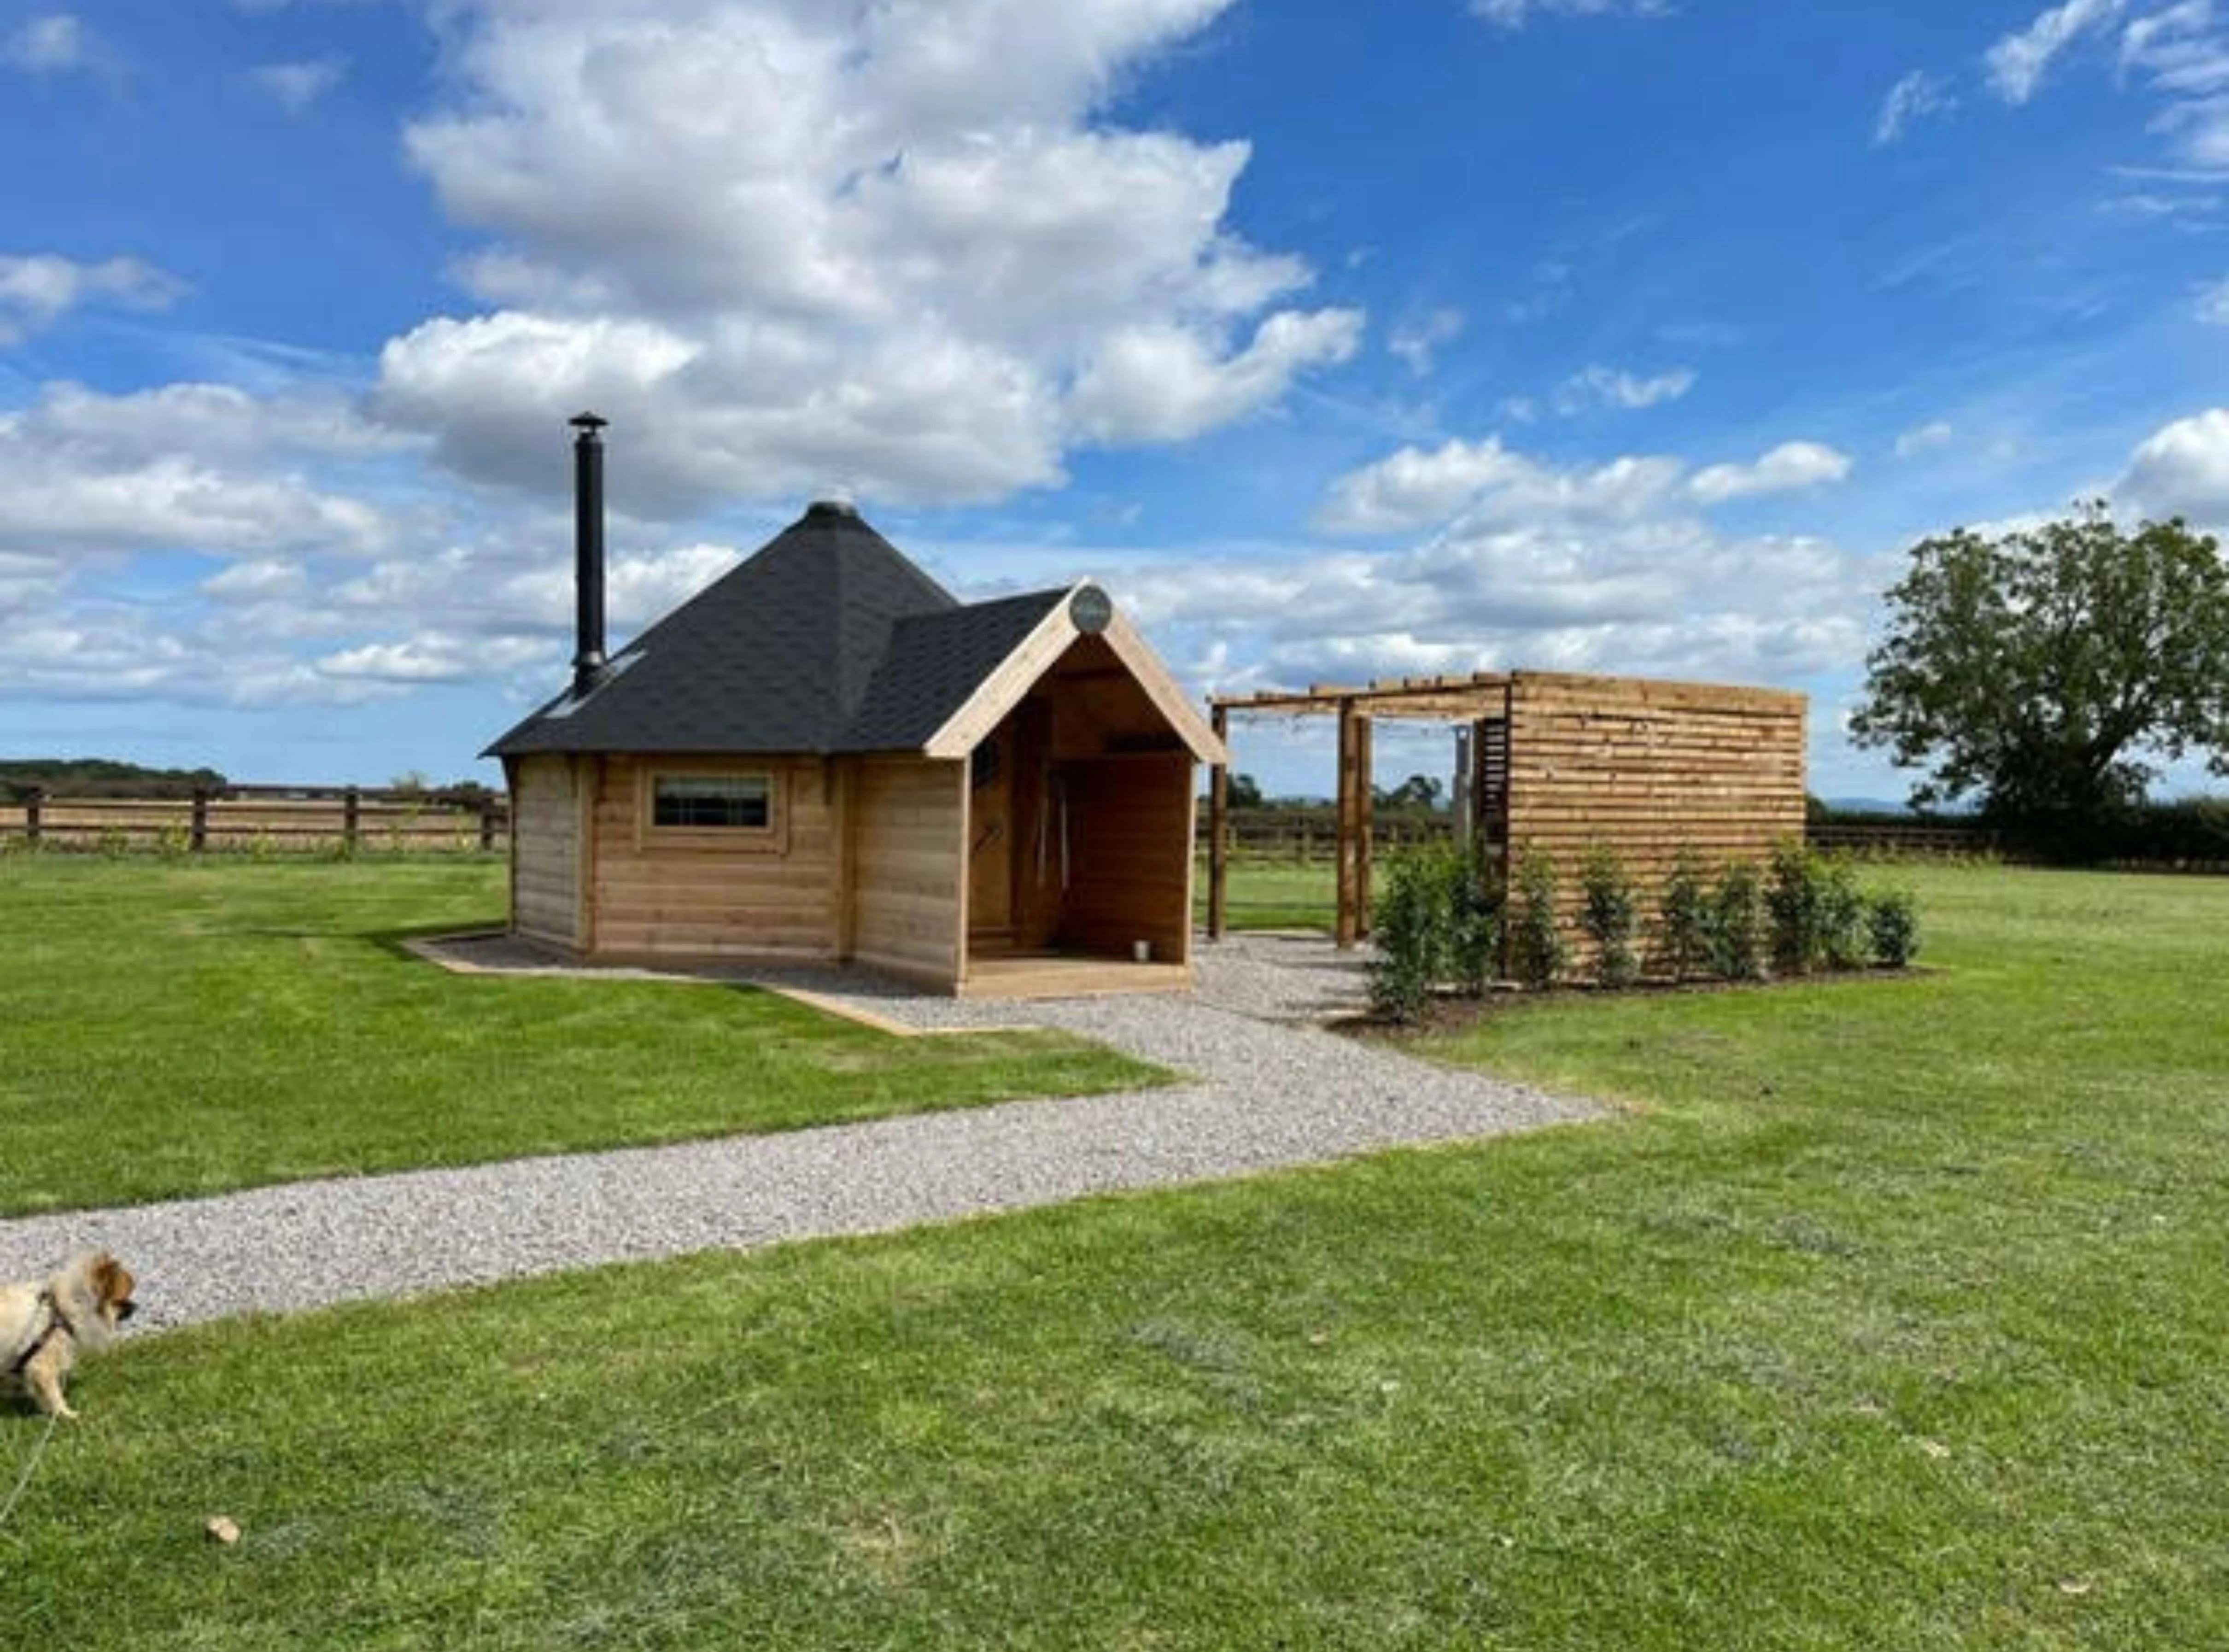 Black roof tiles camping cabin with gravel path and grassy area and pavilion with dog